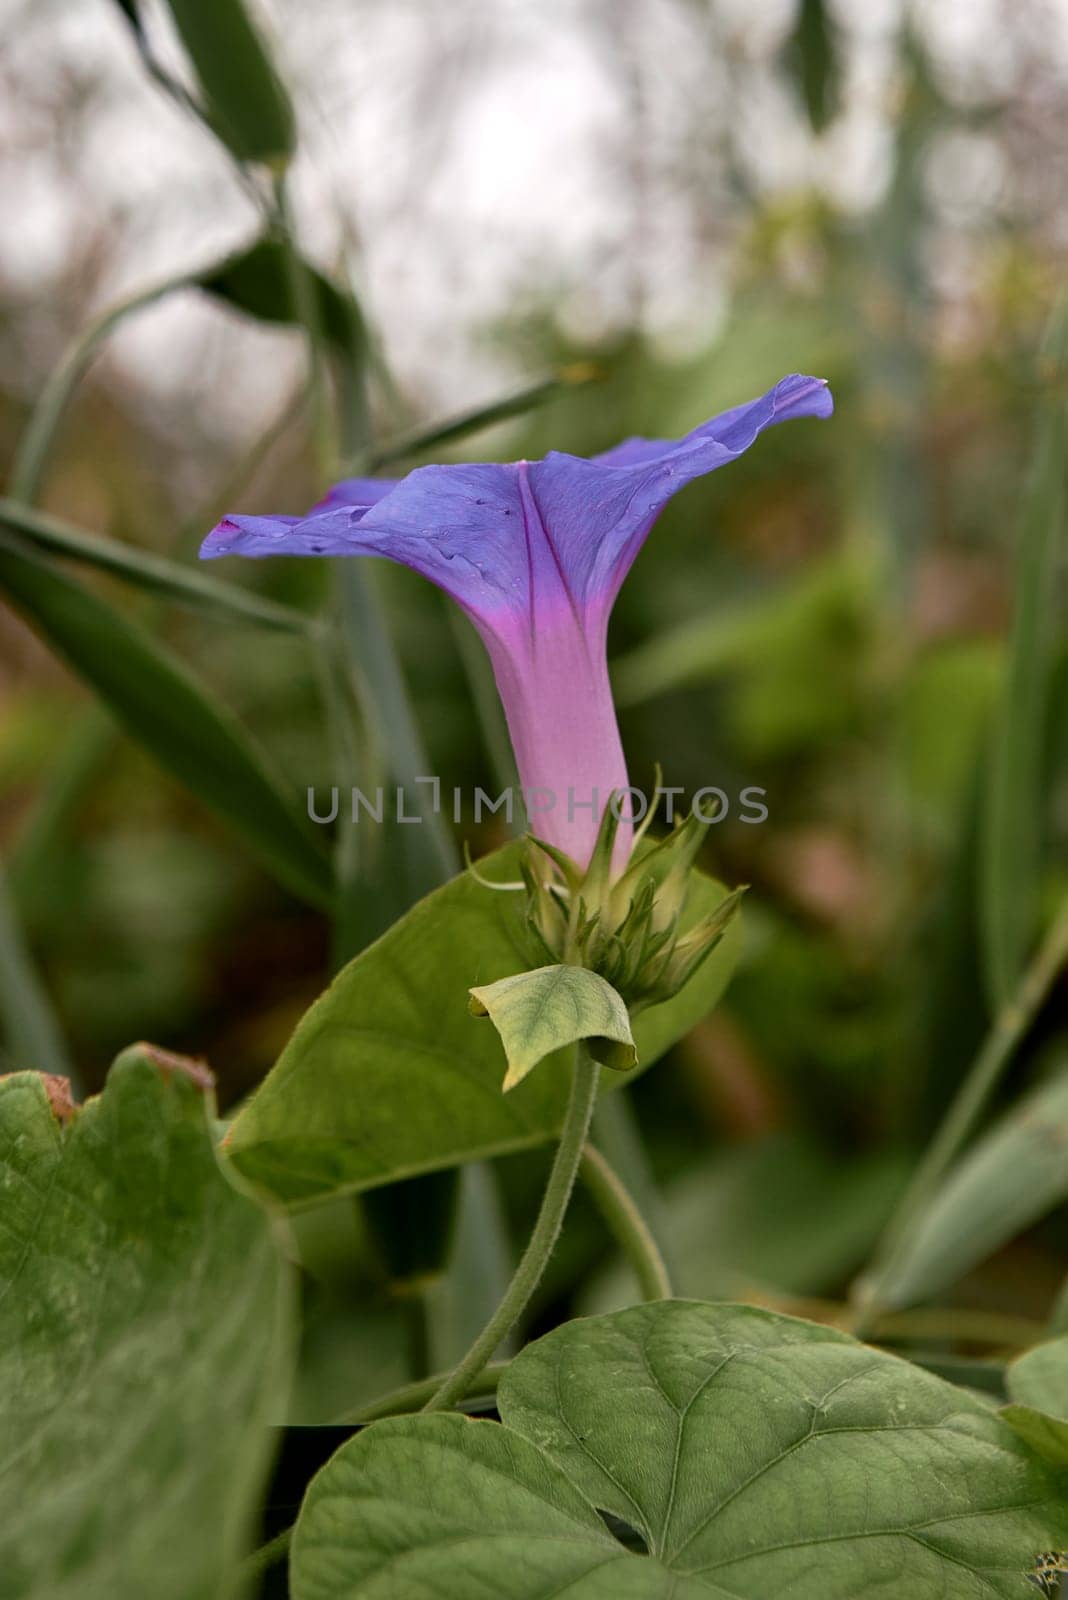 Purple bluebell flower on leaves, background out of focus by raul_ruiz